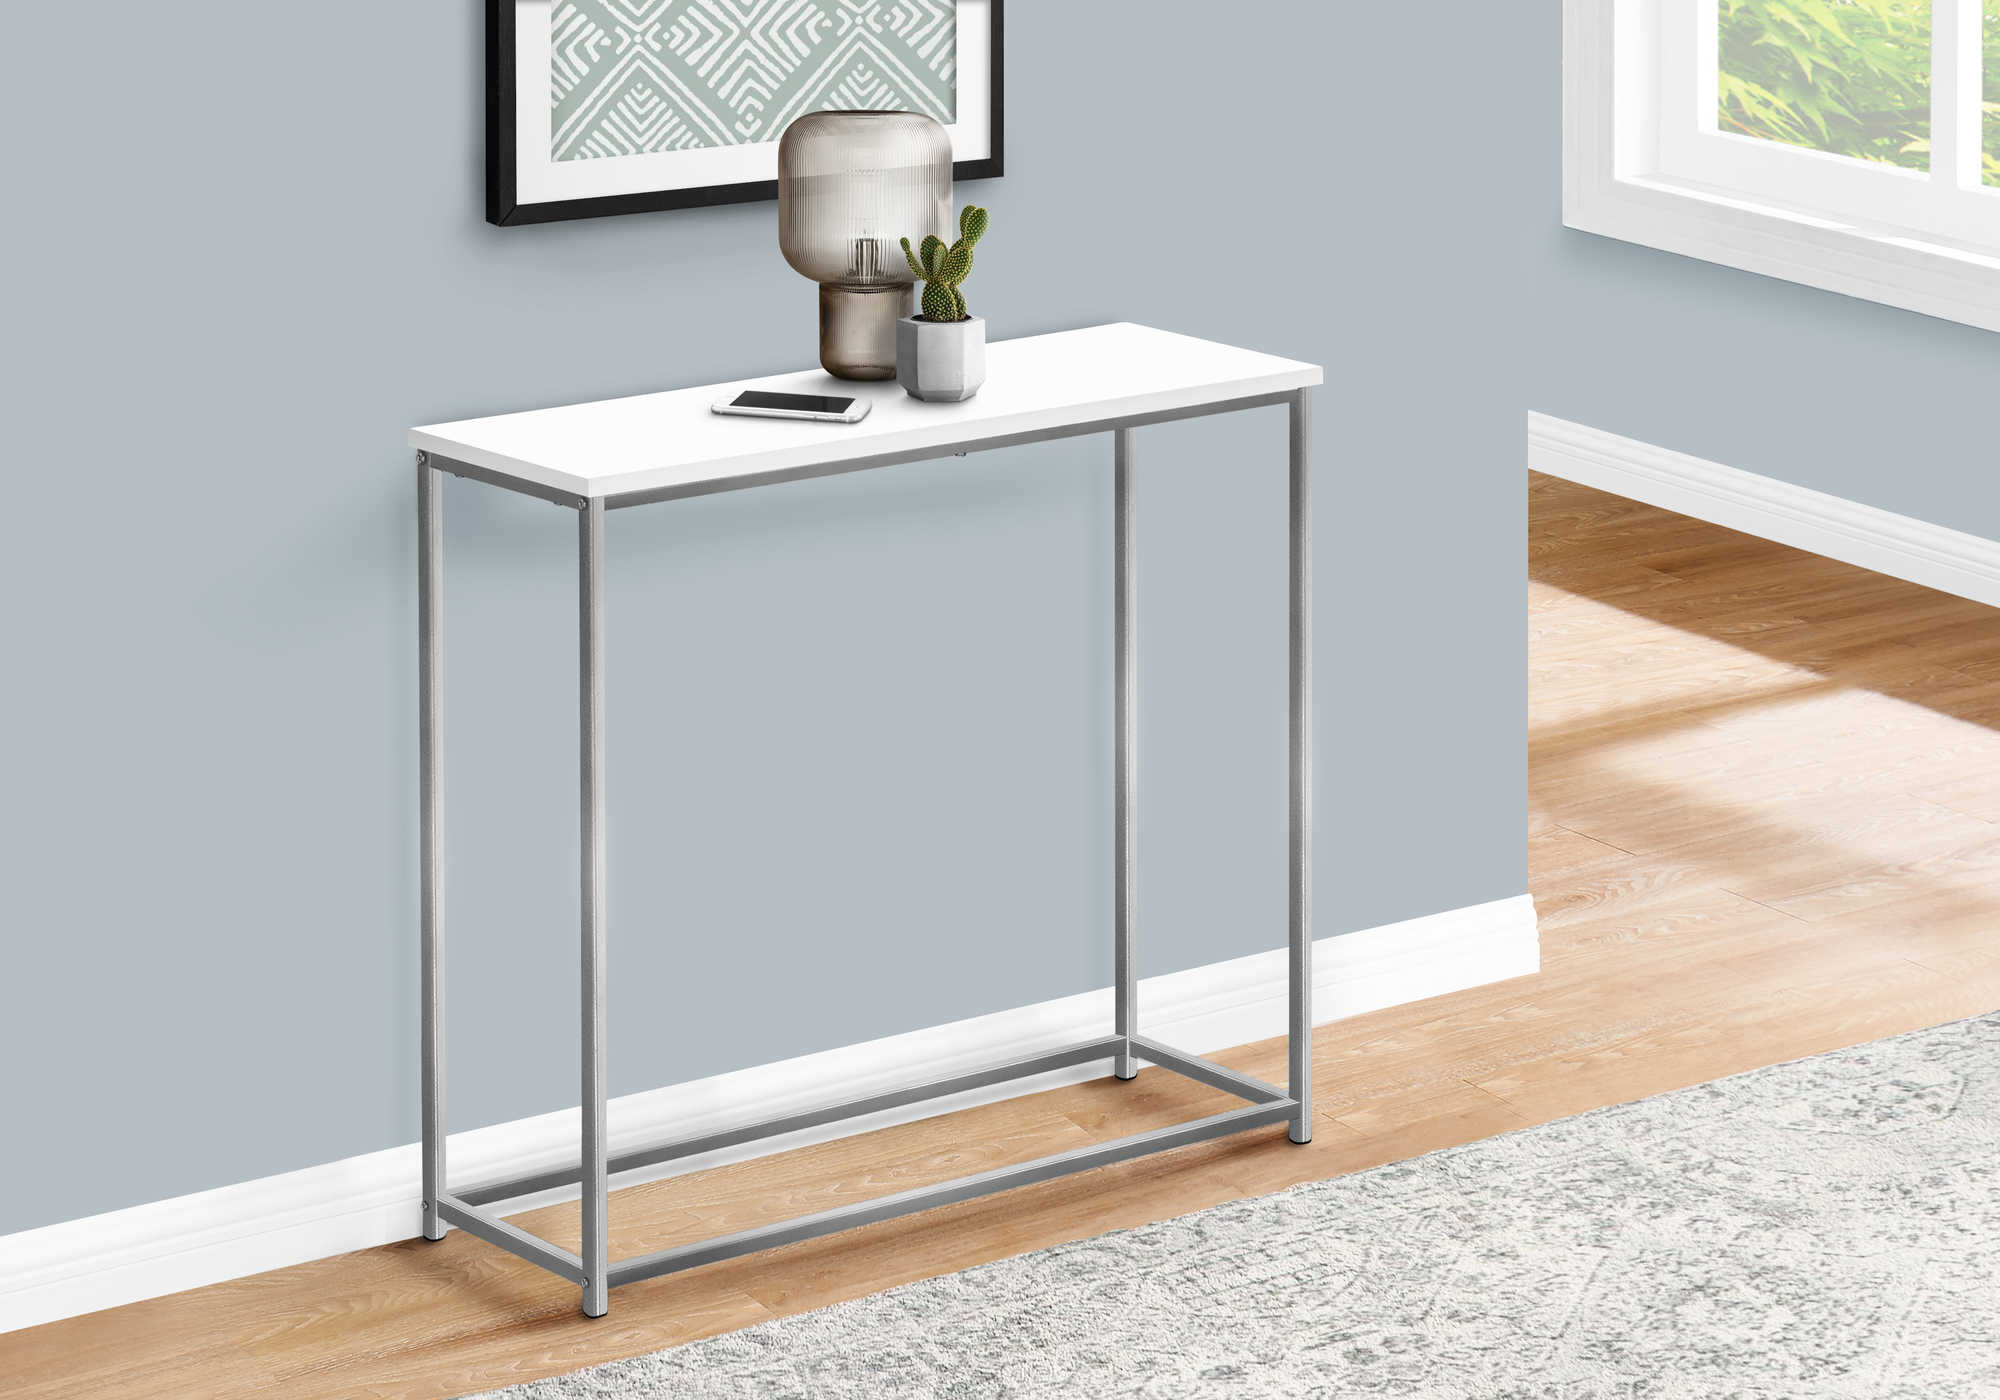 BEDROOM ACCENT CONSOLE TABLE - 32"L / WHITE / SILVER METAL CONSOLE